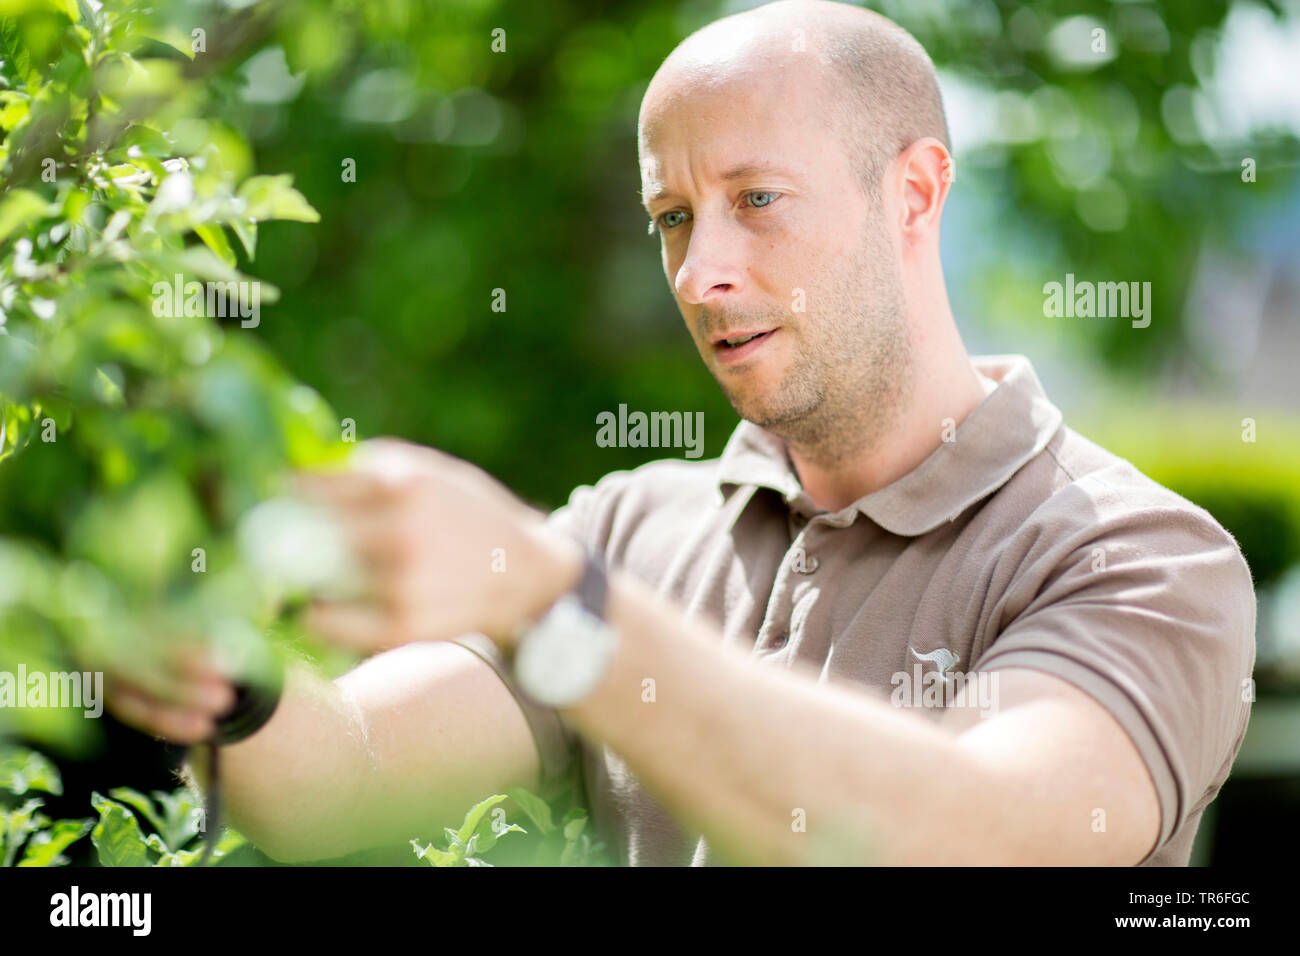 apple tree (Malus domestica), man at tree care operation in the garden, Germany Stock Photo